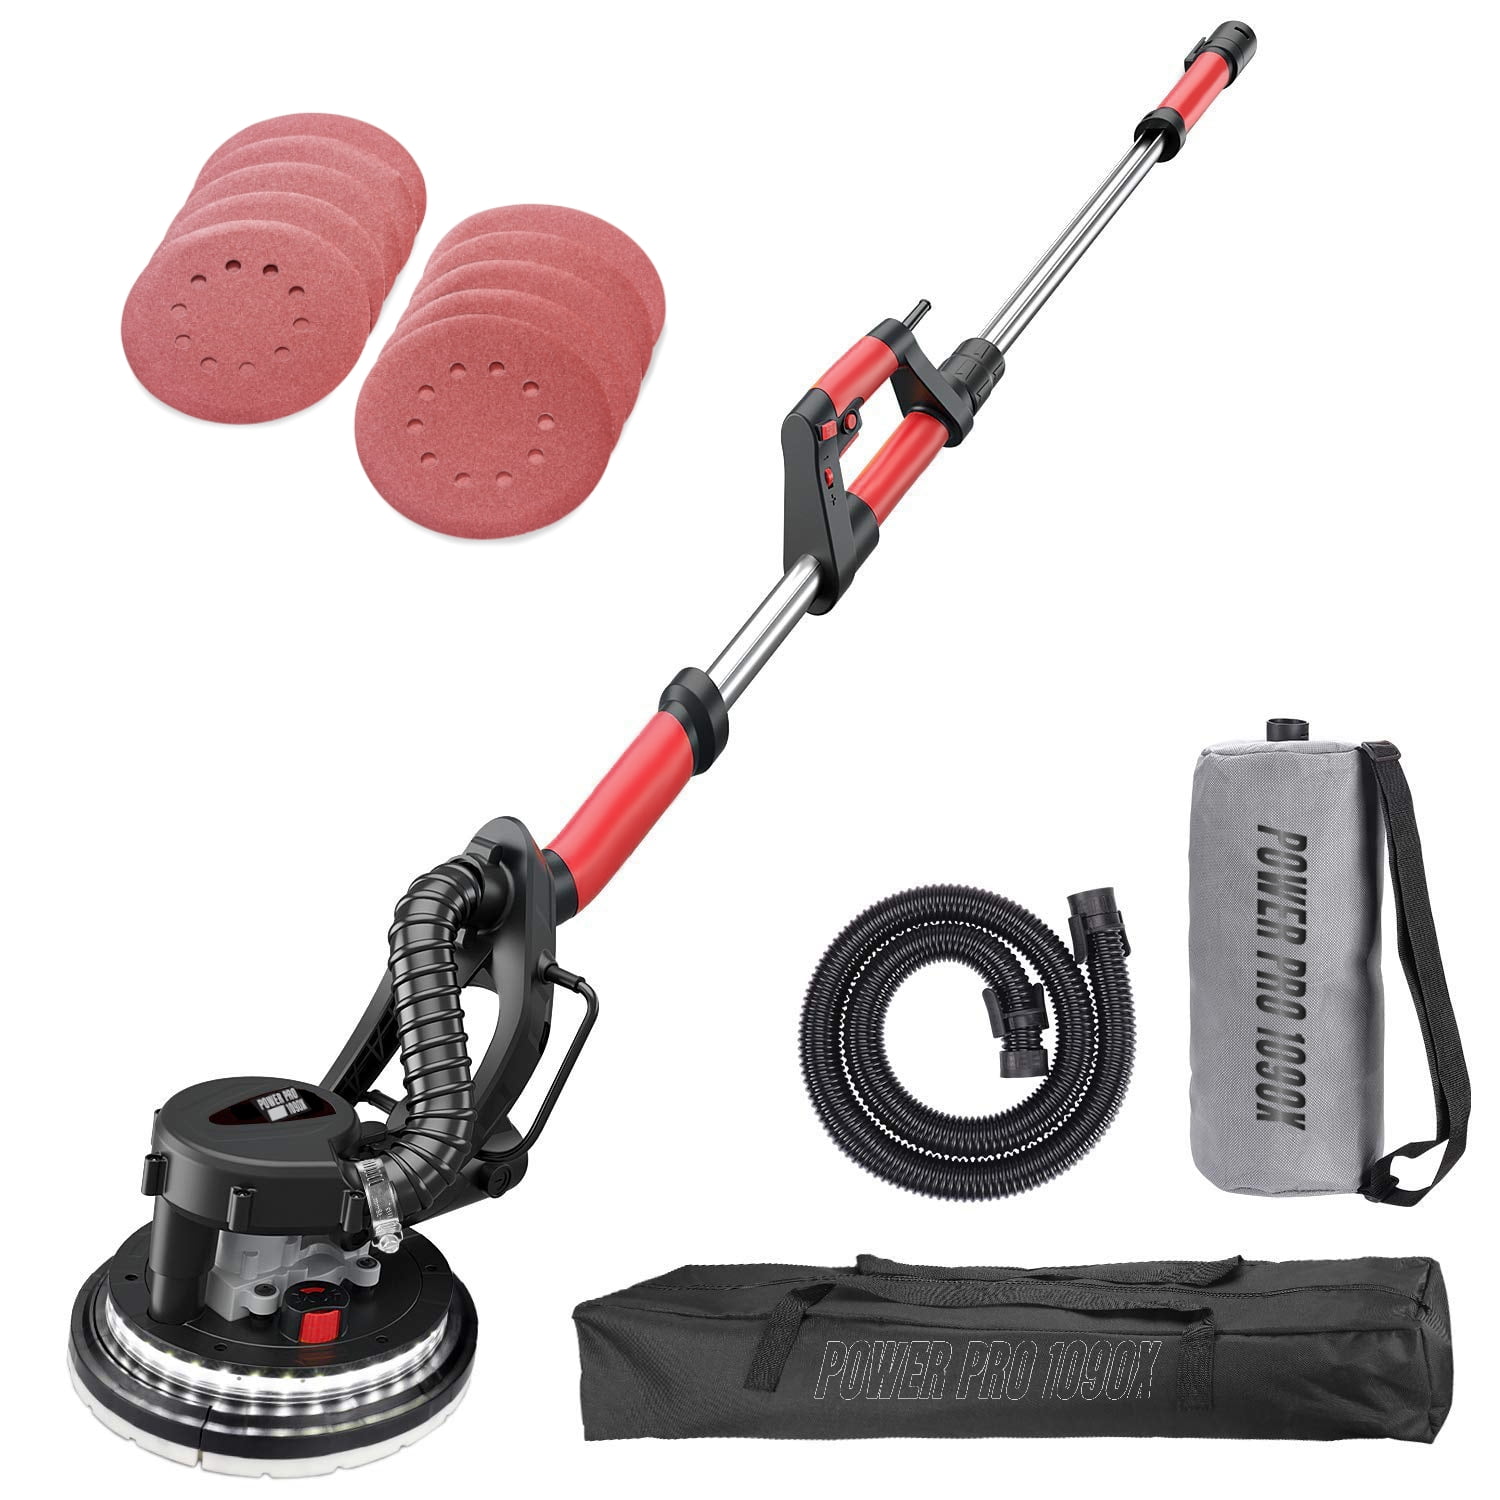 Drywall Sander 750W 225mm Extendable Handle 5 Speed w/ LED light and Vacuum Bag 